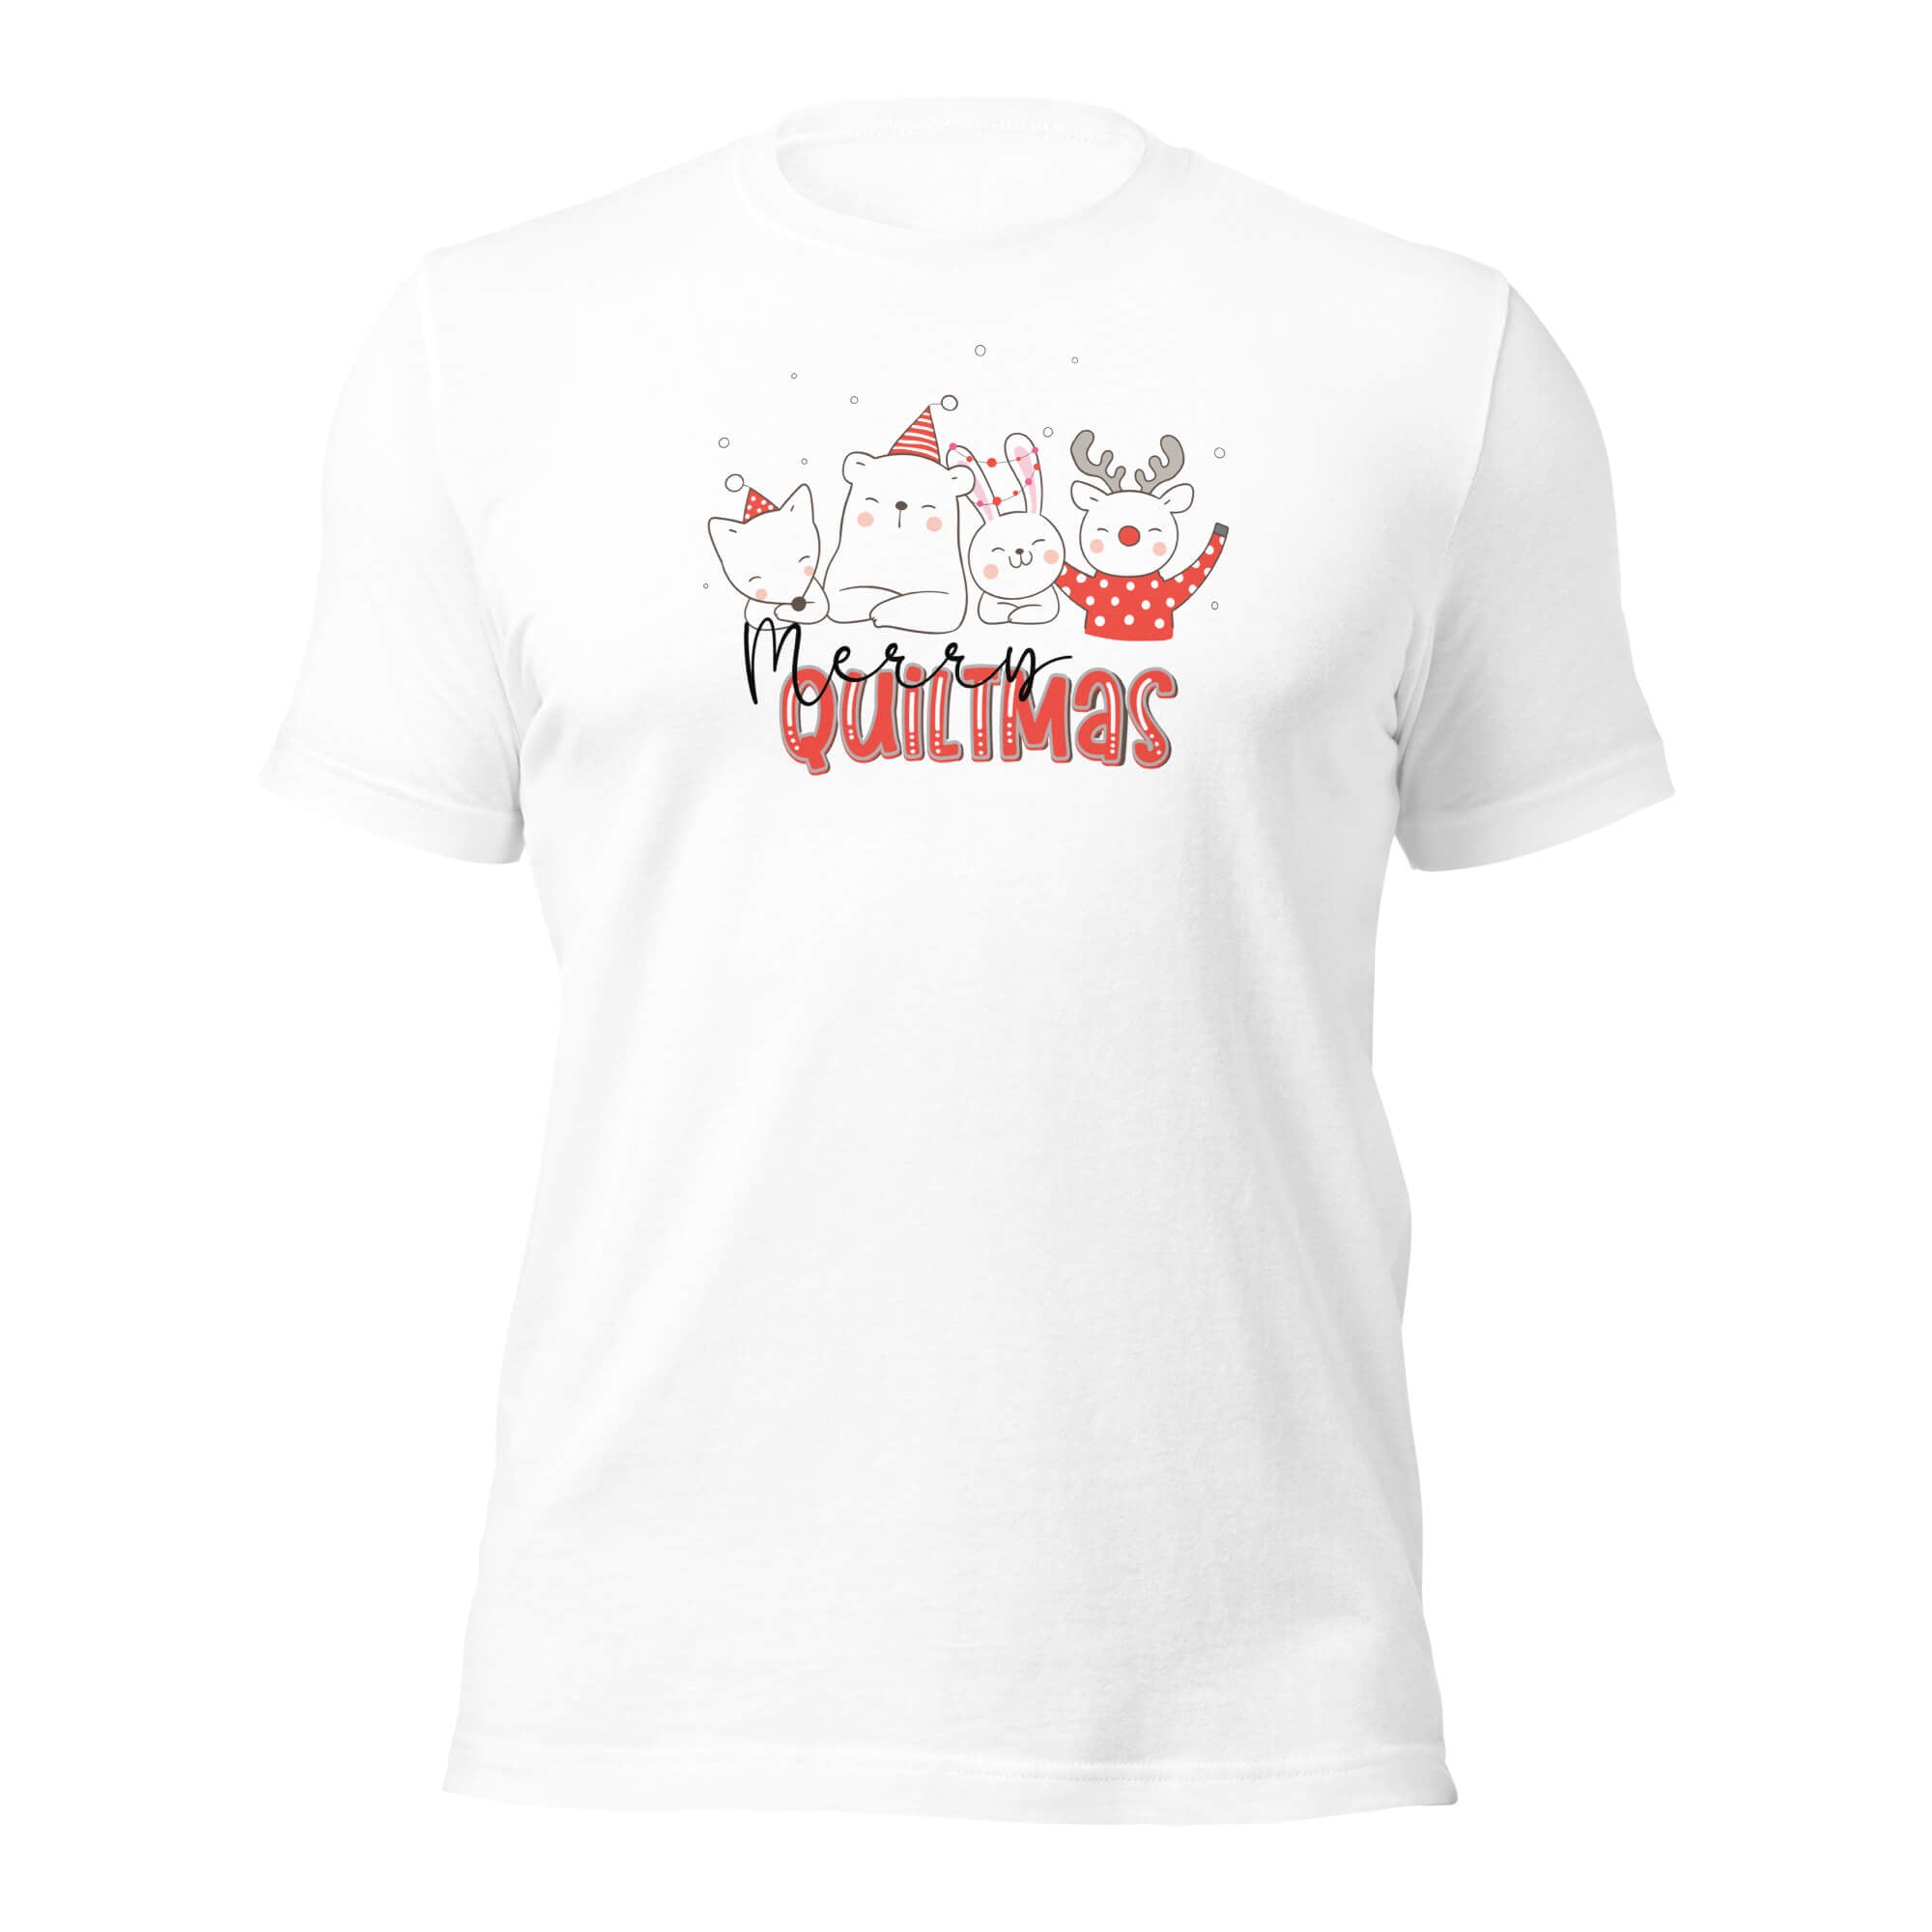 merry-quiltmas-t-shirt-white